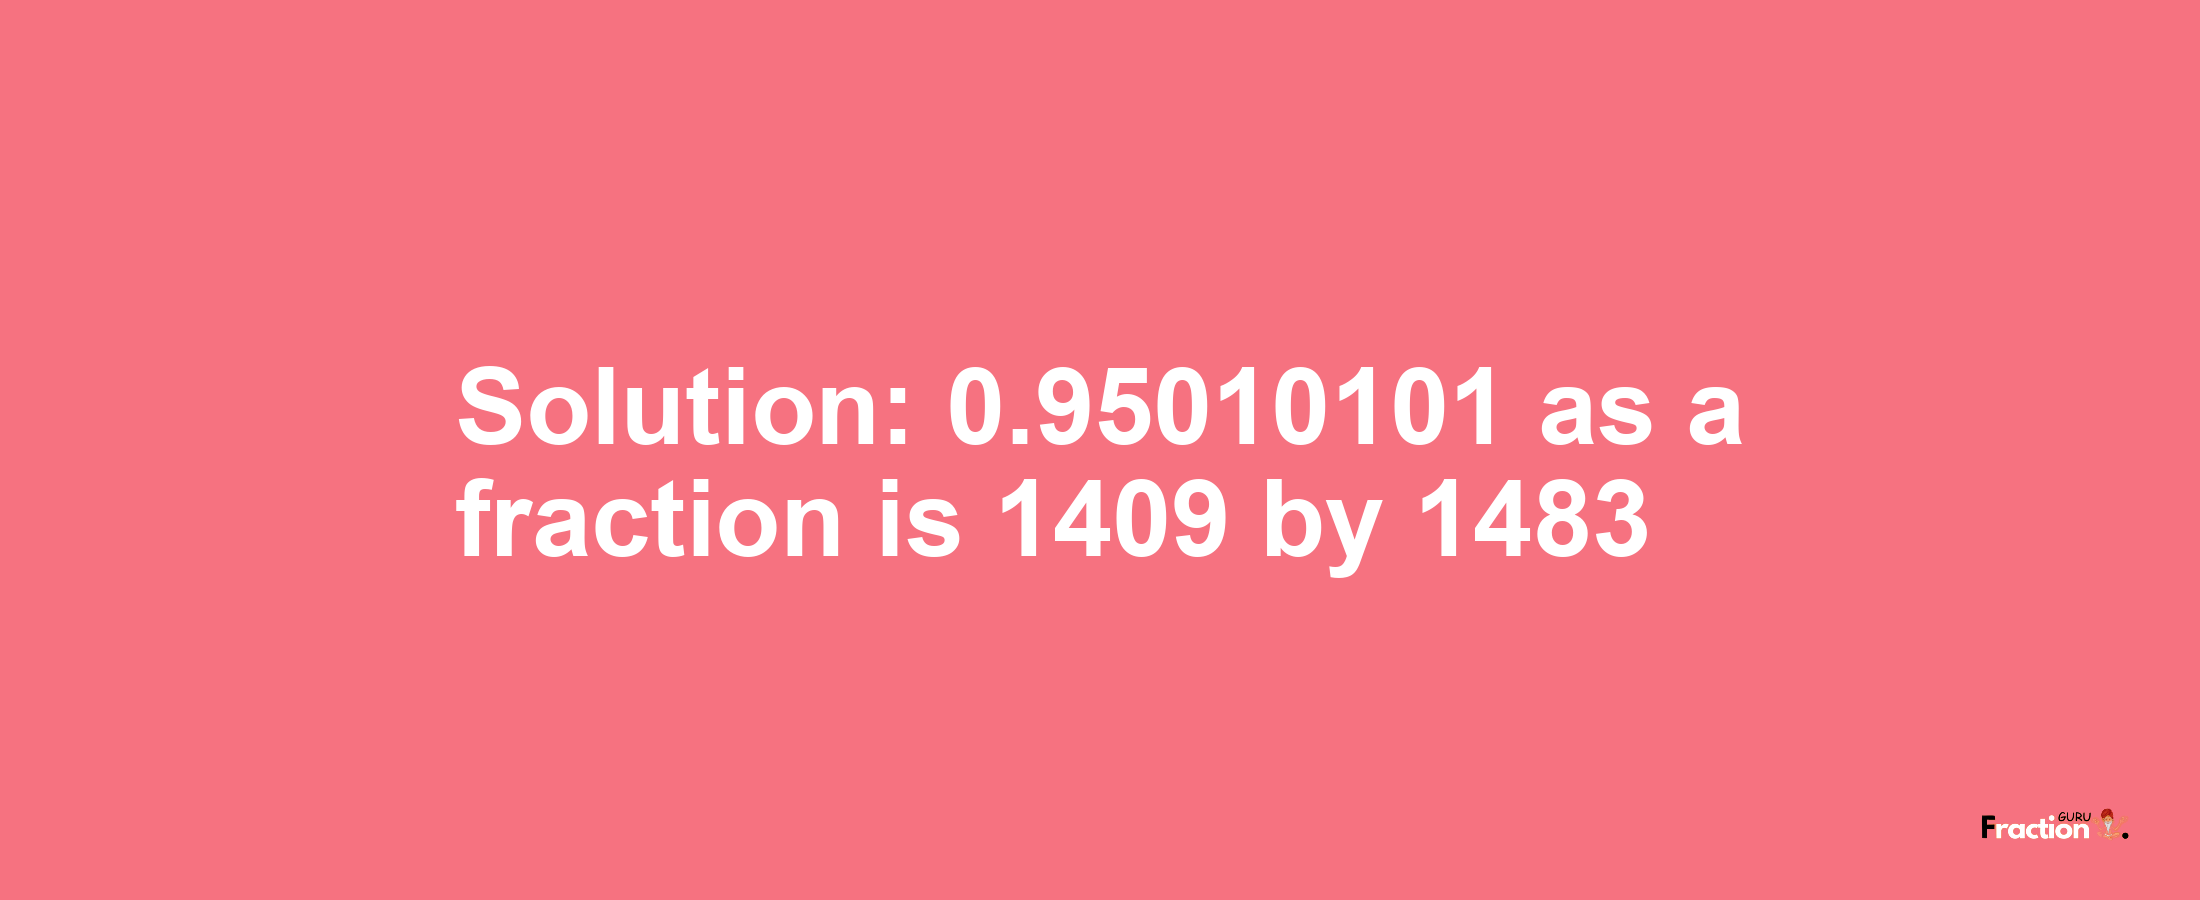 Solution:0.95010101 as a fraction is 1409/1483